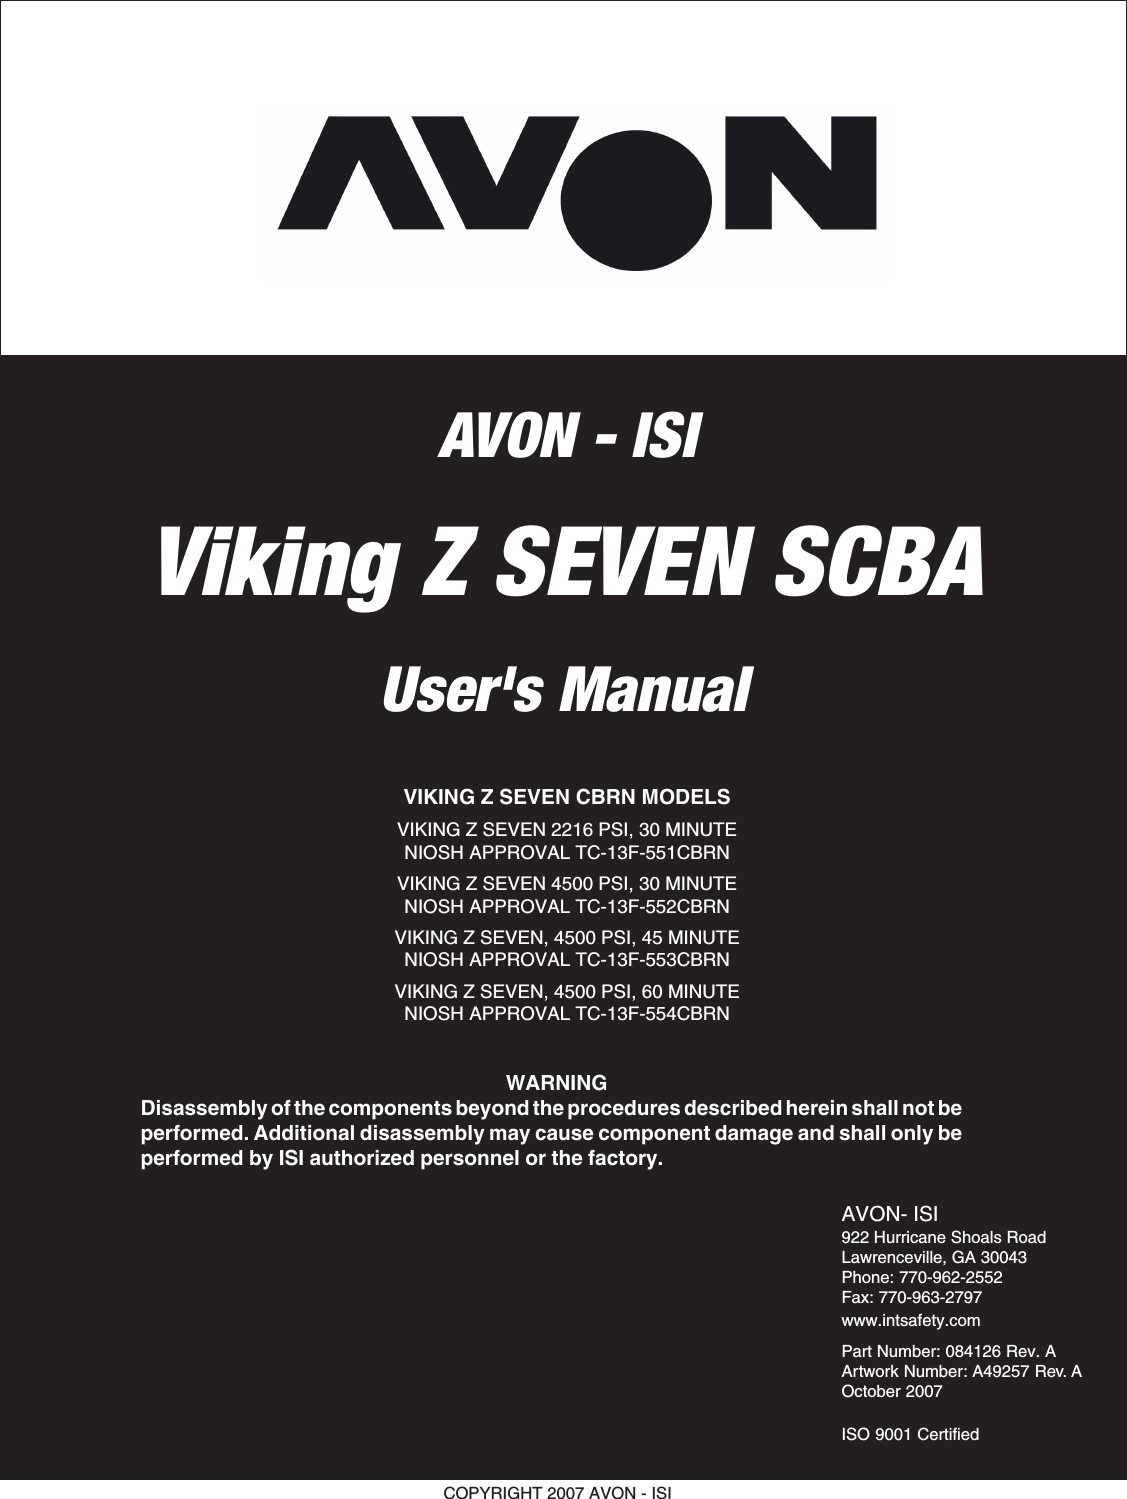 COPYRIGHT 2007 AVON - ISIViking Z SEVEN SCBAUser&apos;s ManualAVON- ISI922 Hurricane Shoals RoadLawrenceville, GA 30043Phone: 770-962-2552Fax: 770-963-2797www.intsafety.comPart Number: 084126 Rev. AArtwork Number: A49257 Rev. AOctober 2007ISO 9001 Certified  WARNINGDisassembly of the components beyond the procedures described herein shall not beperformed. Additional disassembly may cause component damage and shall only beperformed by ISI authorized personnel or the factory.VIKING Z SEVEN CBRN MODELSVIKING Z SEVEN 2216 PSI, 30 MINUTENIOSH APPROVAL TC-13F-551CBRNVIKING Z SEVEN 4500 PSI, 30 MINUTENIOSH APPROVAL TC-13F-552CBRNVIKING Z SEVEN, 4500 PSI, 45 MINUTENIOSH APPROVAL TC-13F-553CBRNVIKING Z SEVEN, 4500 PSI, 60 MINUTENIOSH APPROVAL TC-13F-554CBRNAVON - ISI